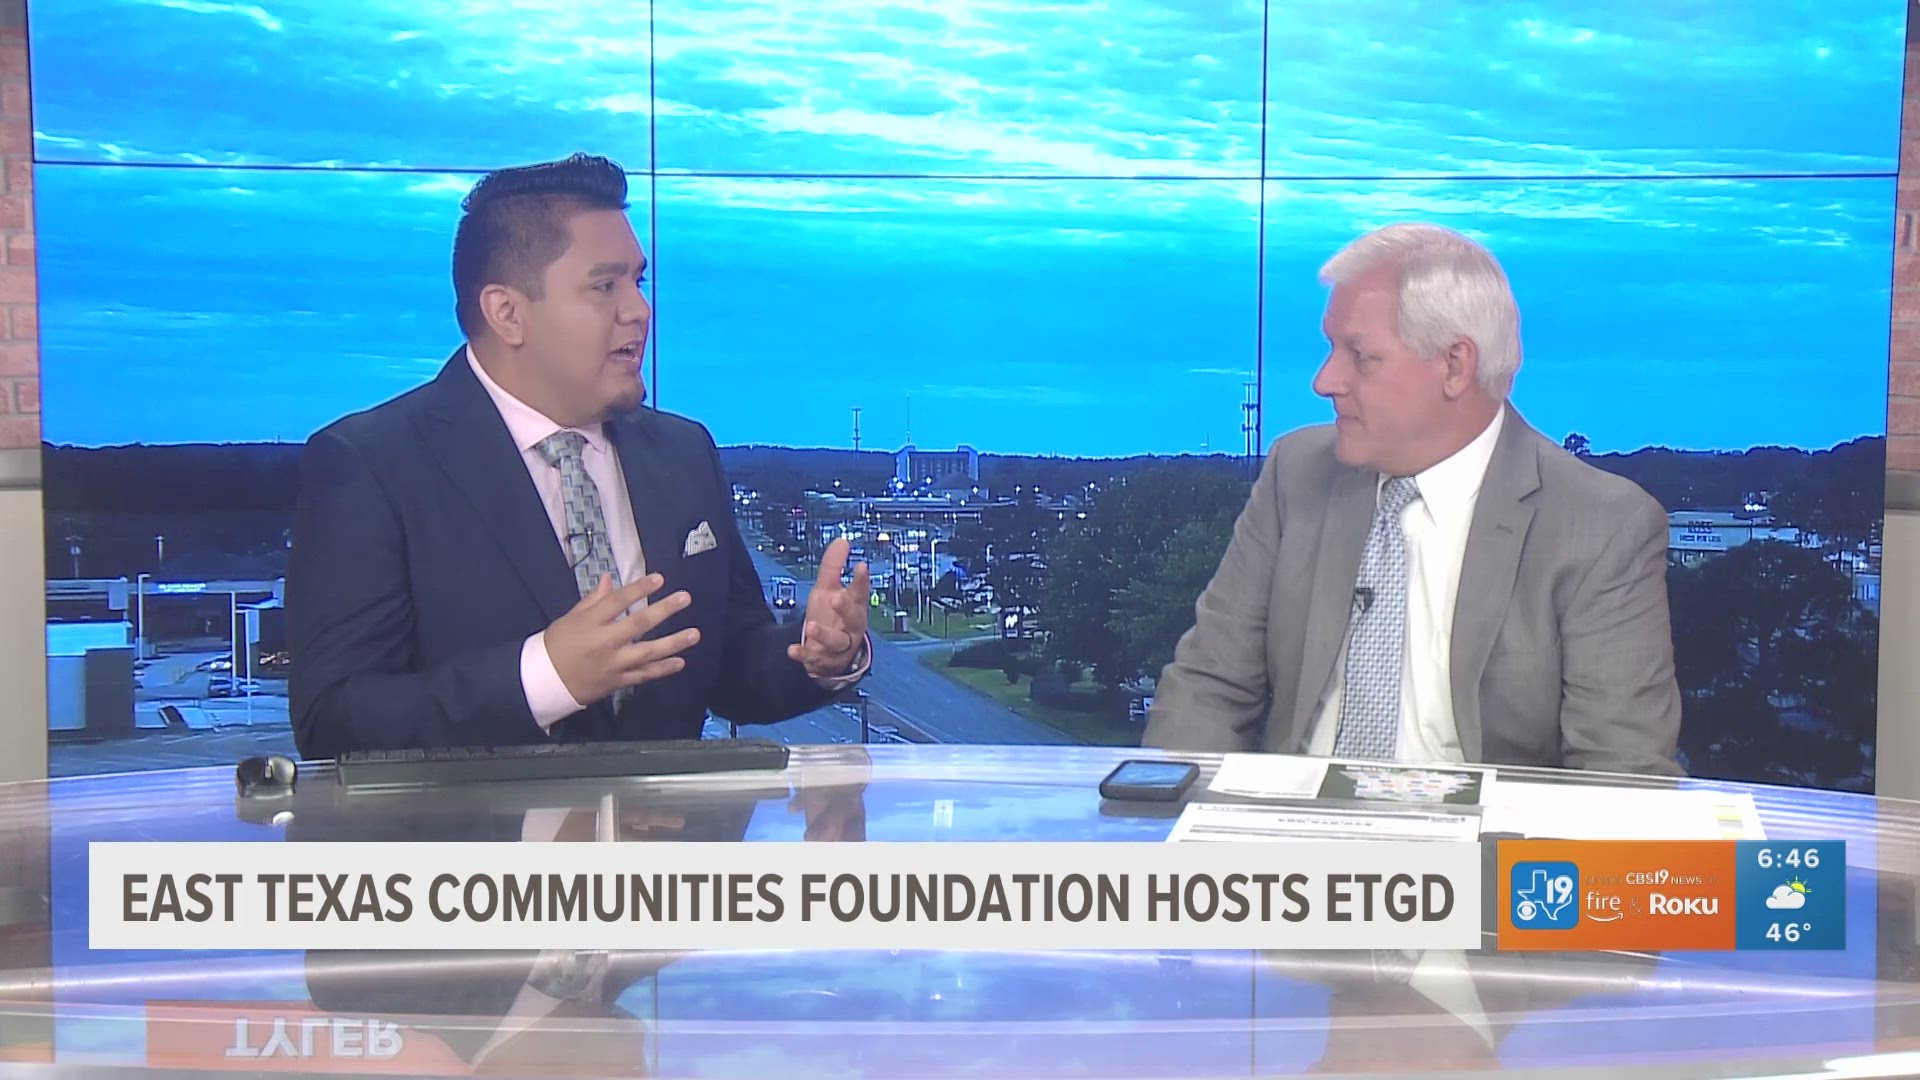 The ETCF was founded in 1989 by visionary leaders who saw the need for a community foundation to serve the people and communities of East Texas.